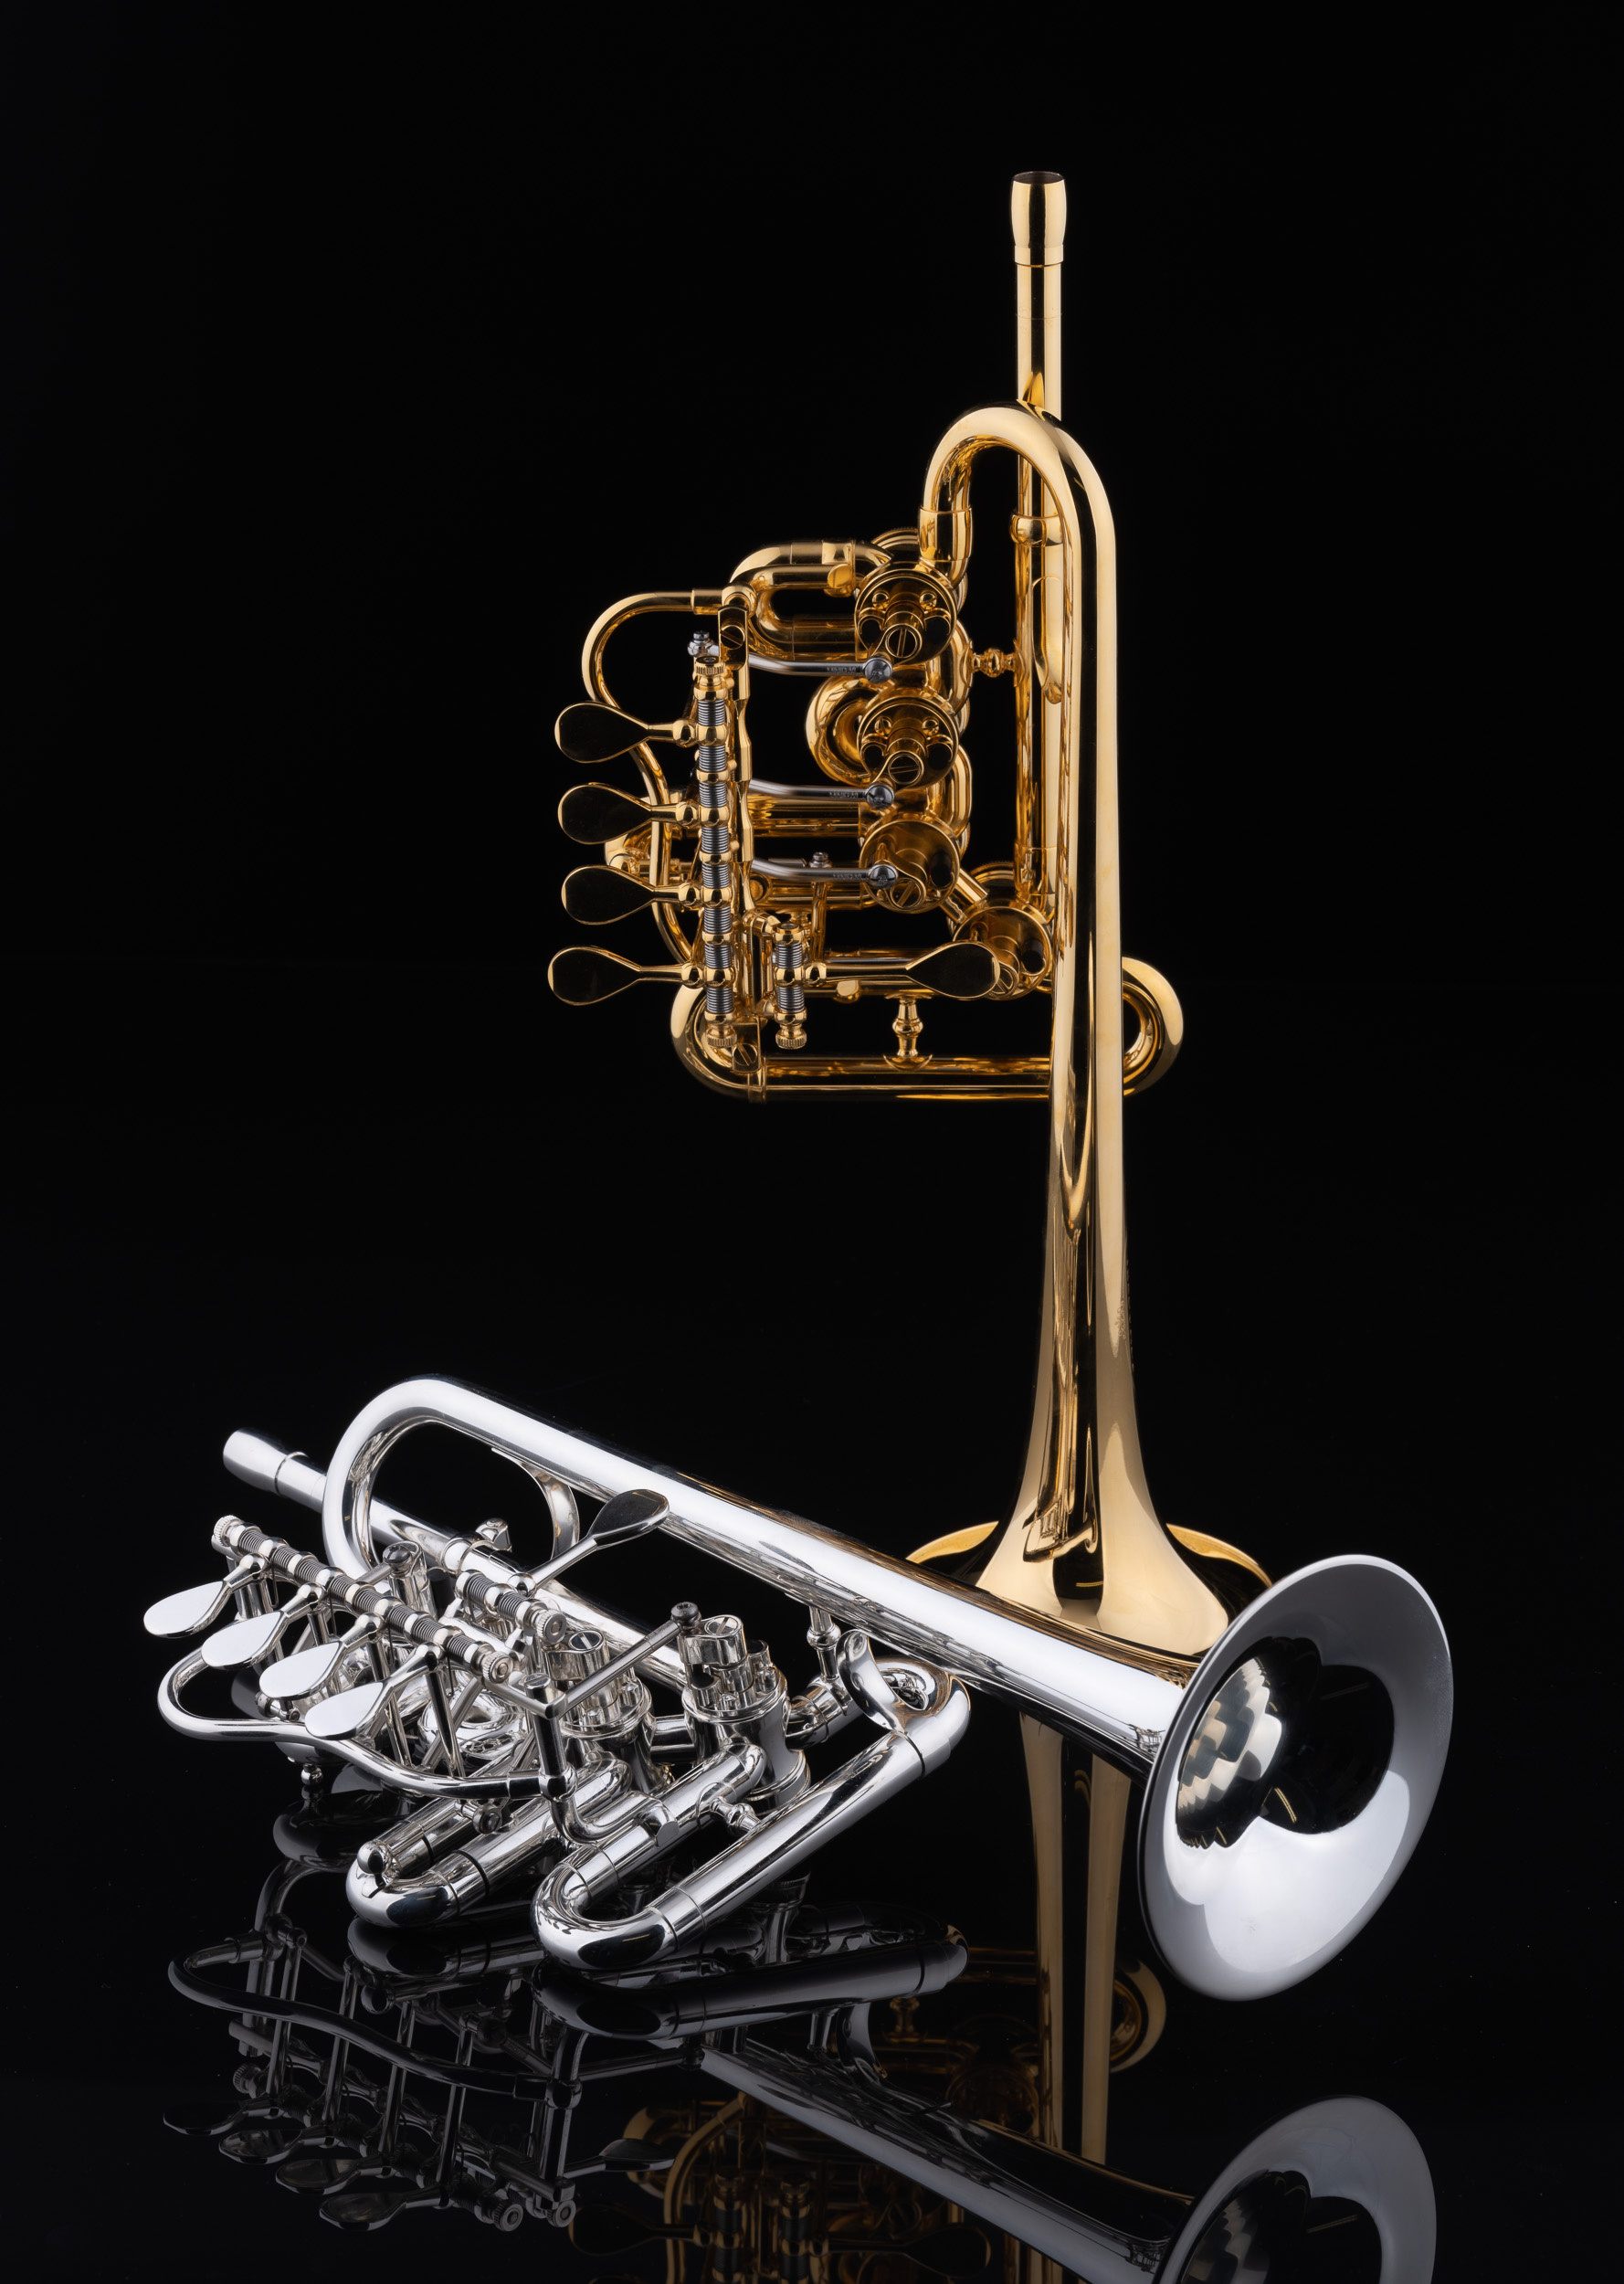 Trumpet: Piccolo Model “Berlin”, Schagerl trumpets, An instrument for the professional Orchestra or Solo players. 1780x2500 HD Background.